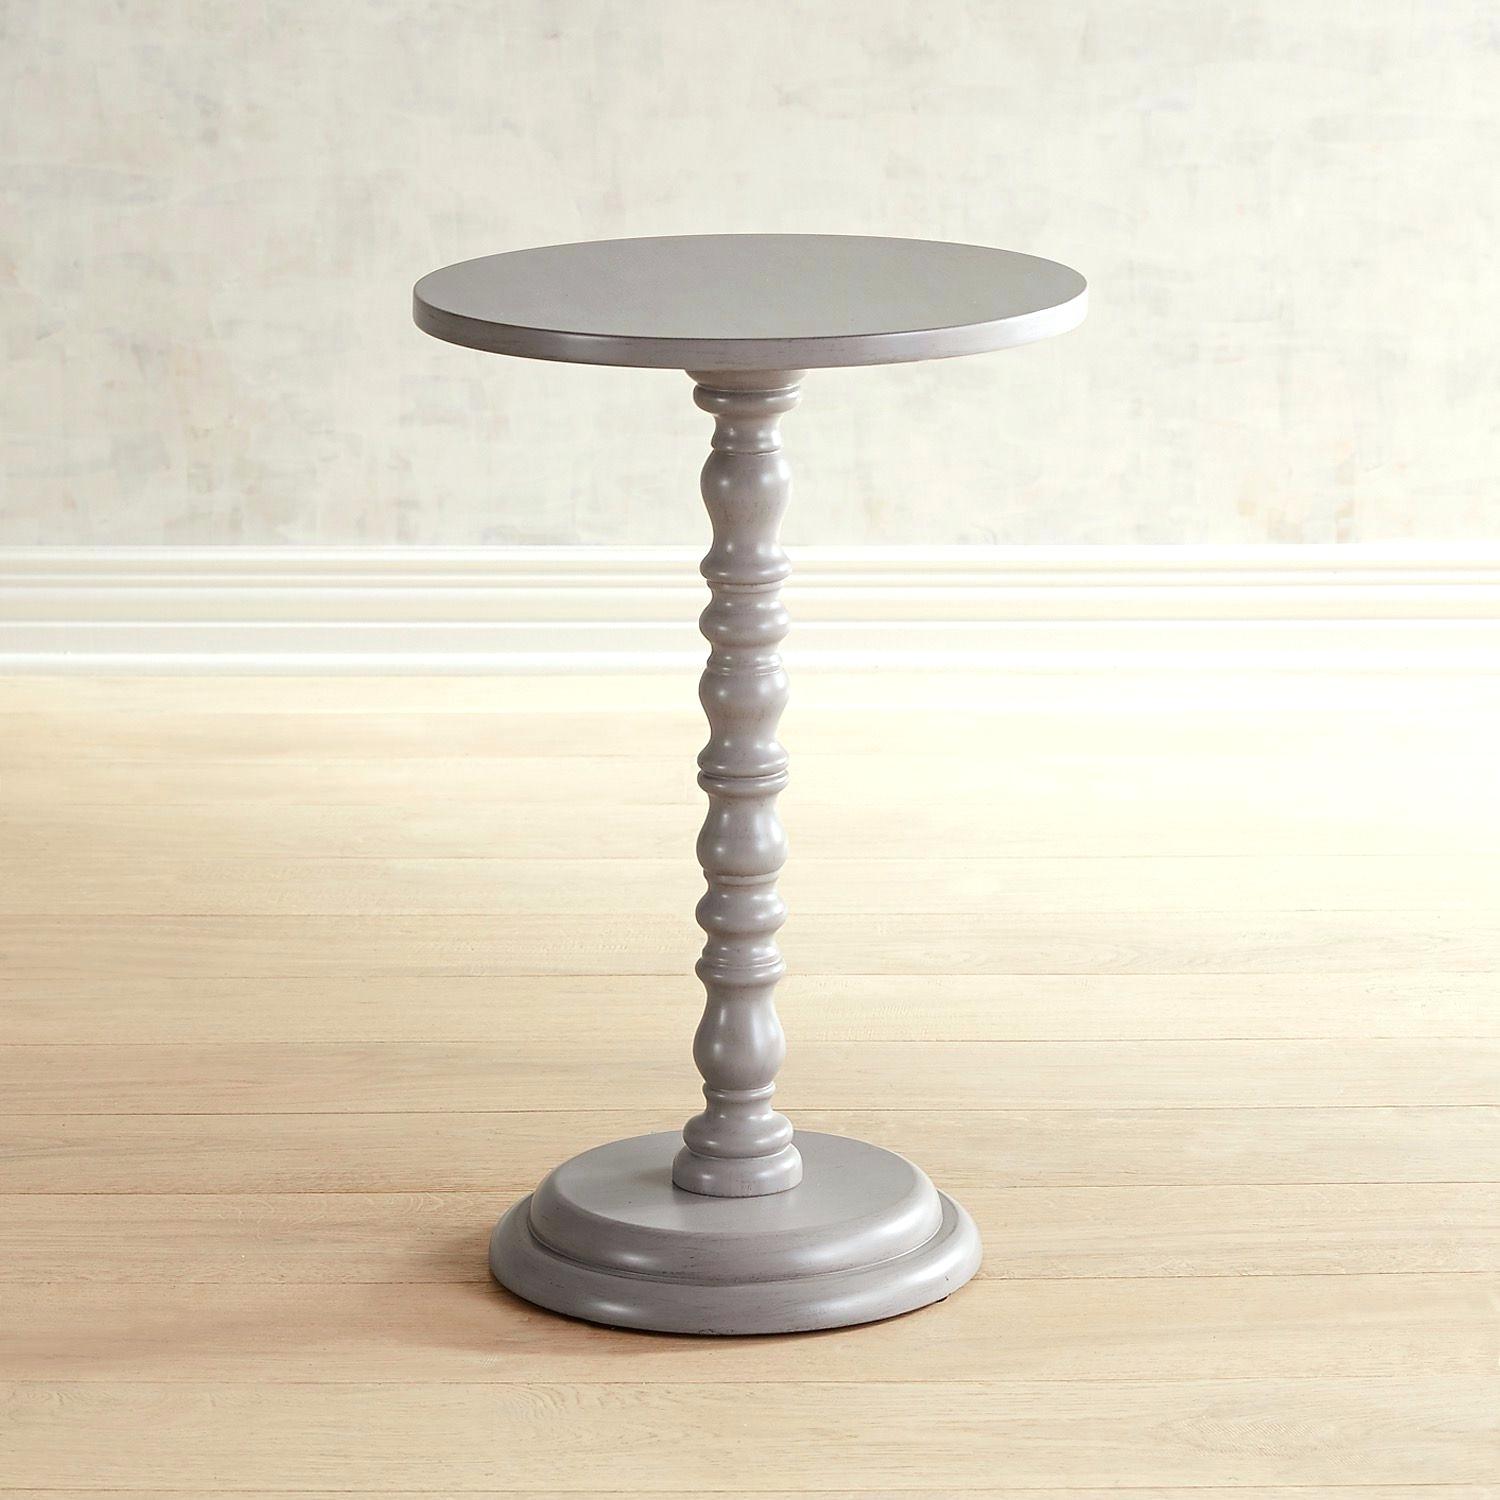 pier accent tables new house sample mosaic table bar height legs glass top side chests and consoles ethan allen painted furniture contemporary bedroom lamps modern kitchen clocks